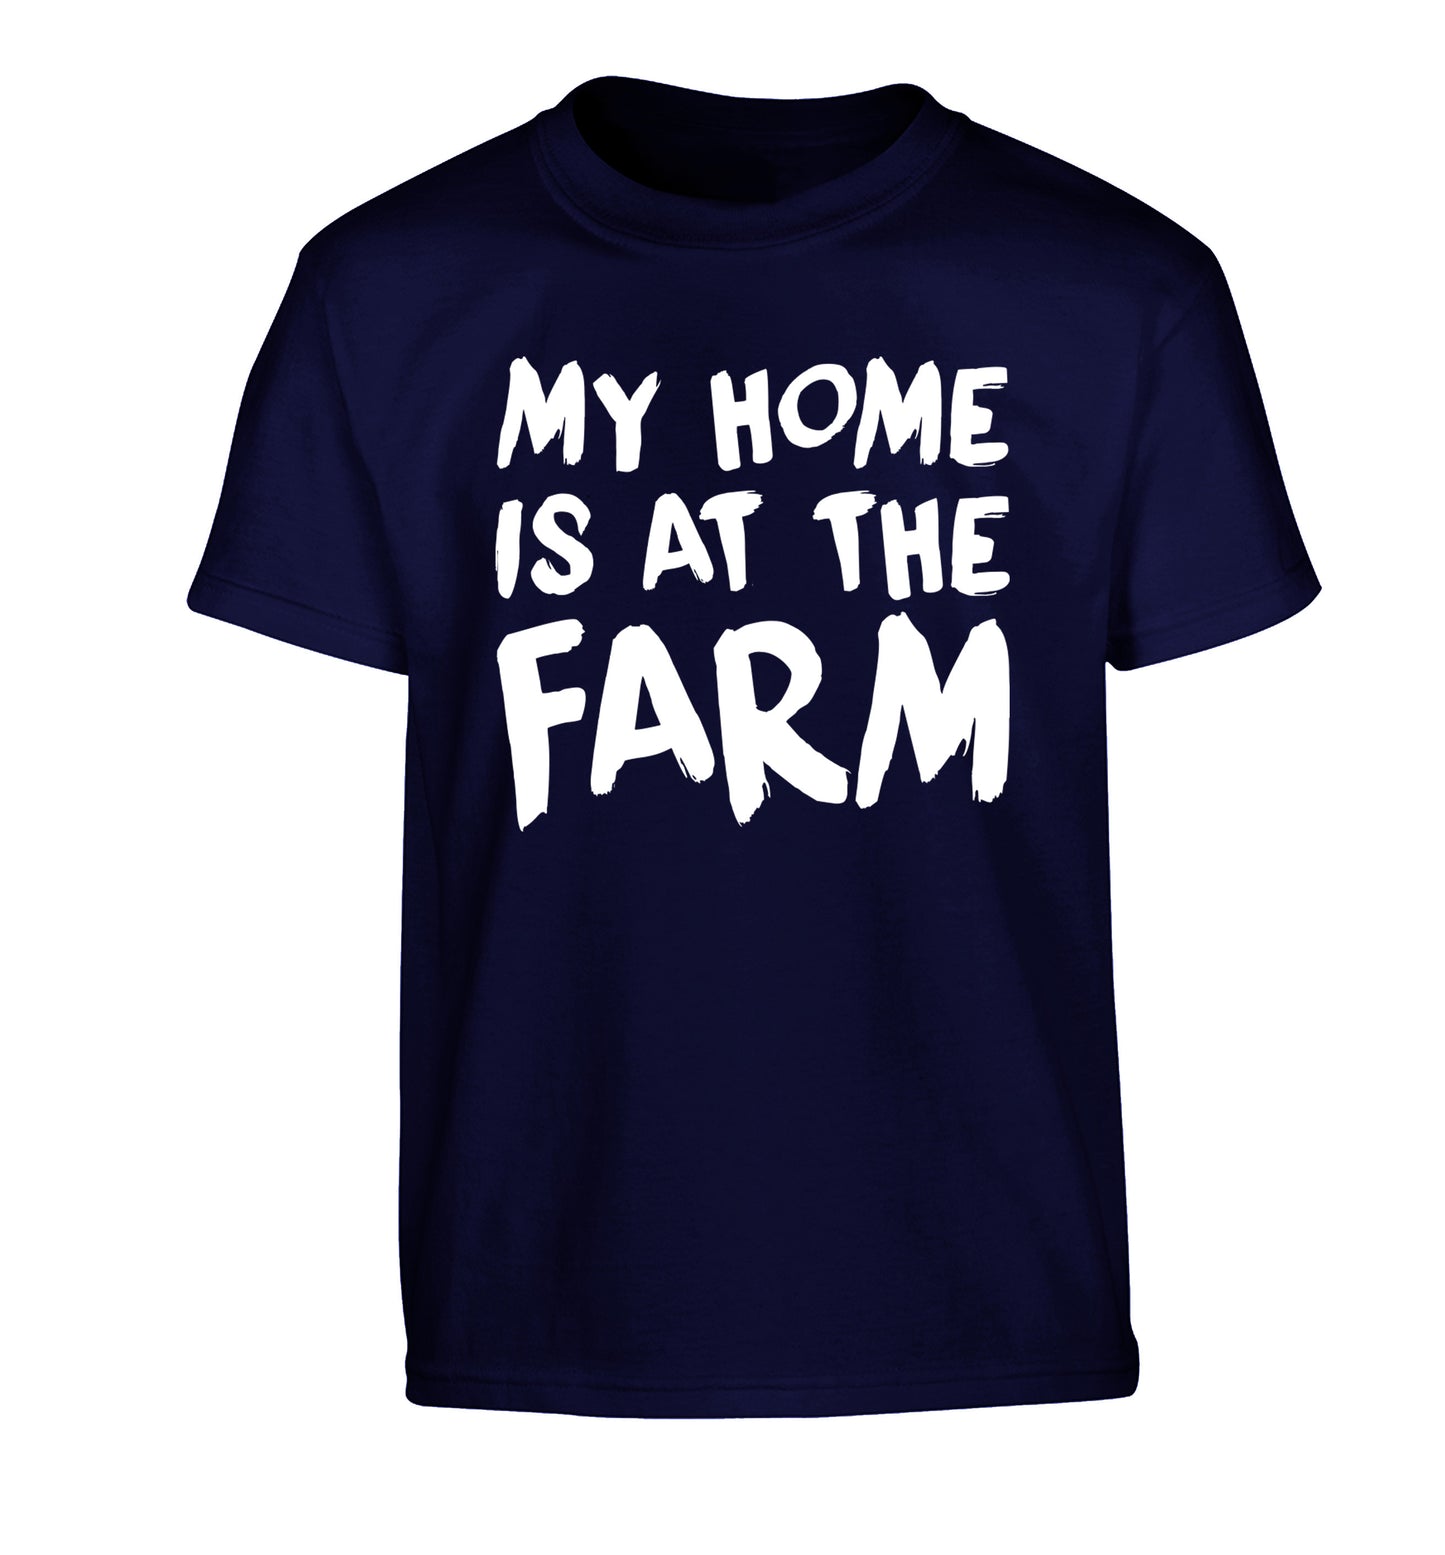 My home is at the farm Children's navy Tshirt 12-14 Years